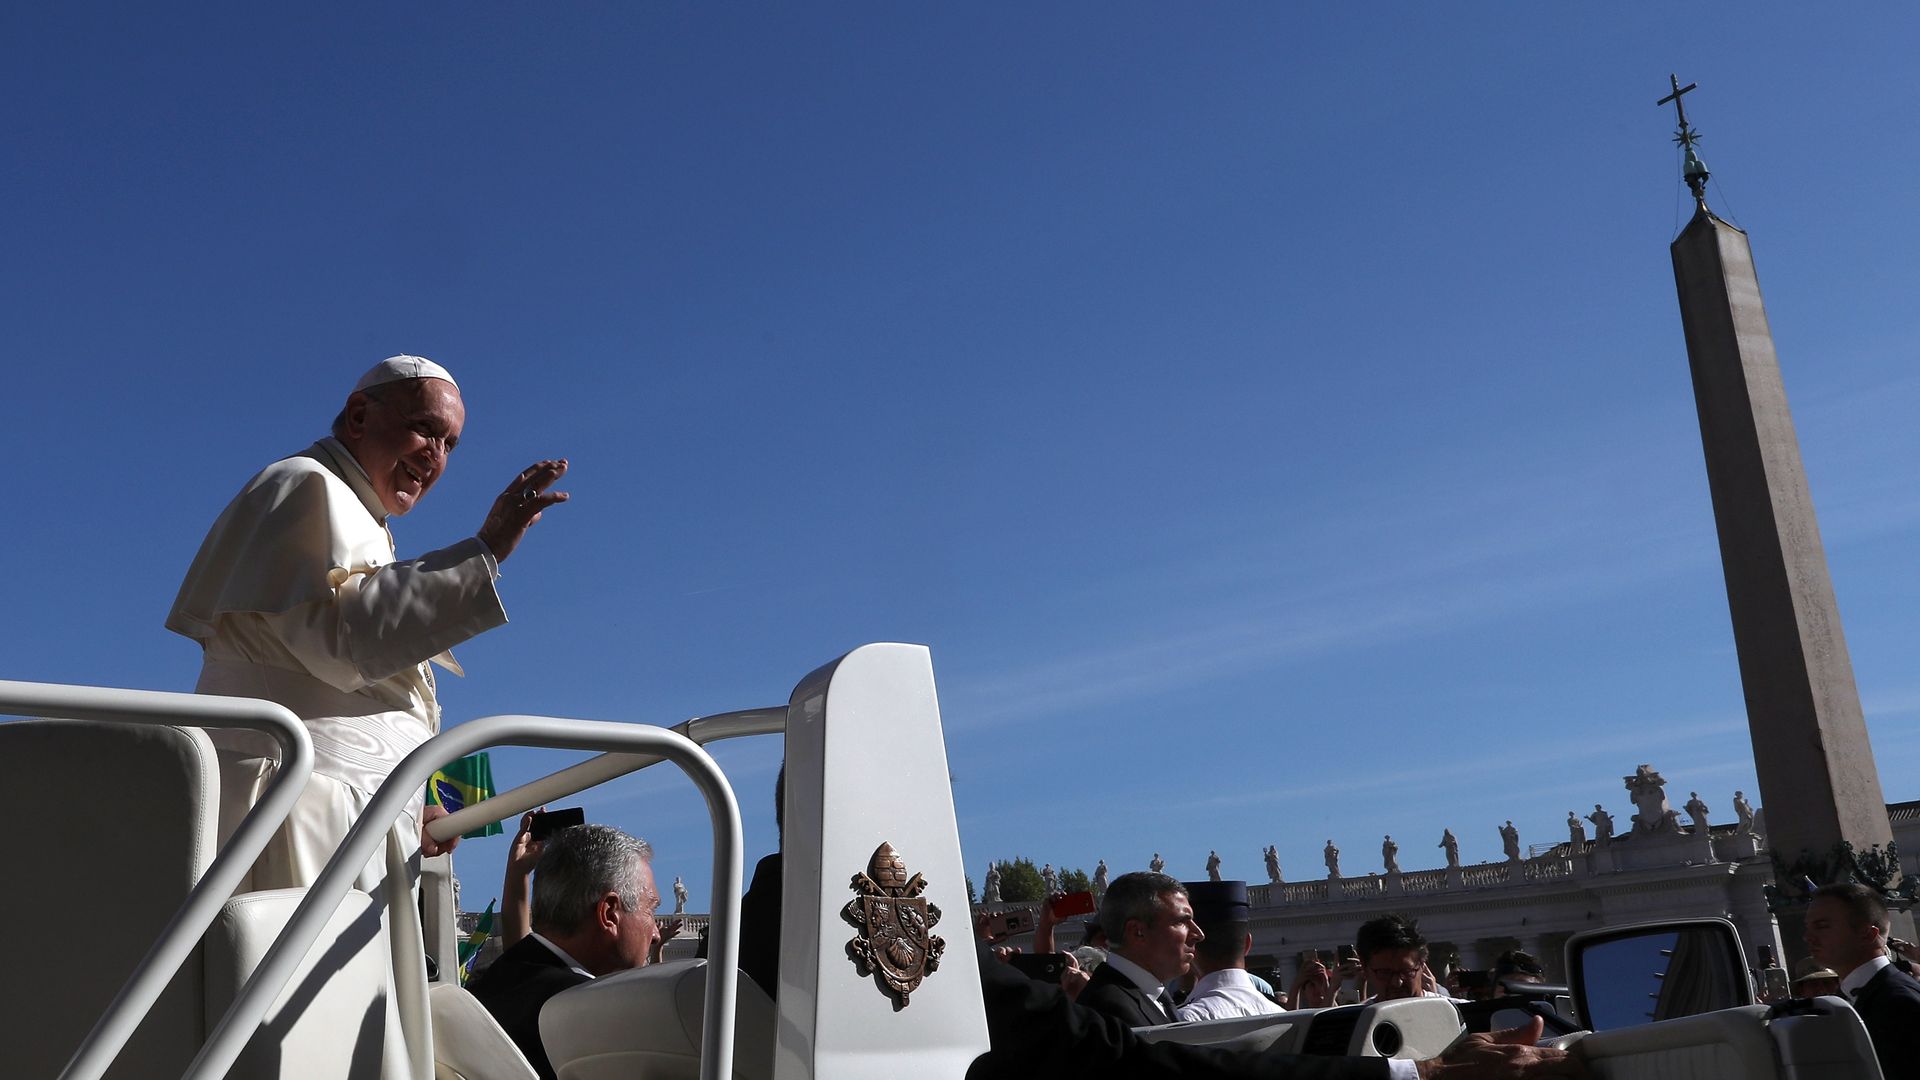 Pope Francis waving to a crowd.